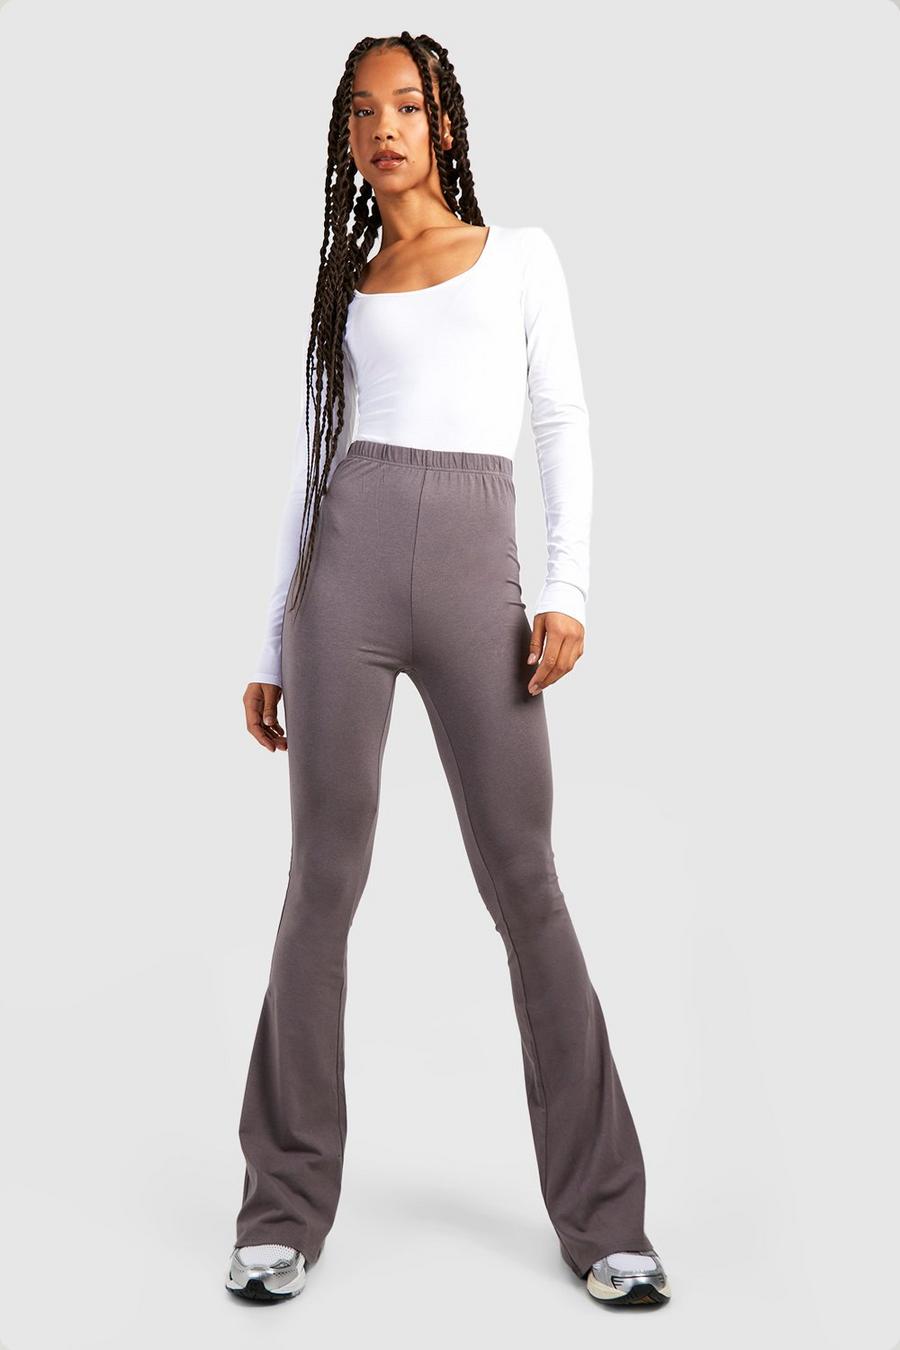 Charcoal grey Tall Premium Super Soft High Waisted Flares